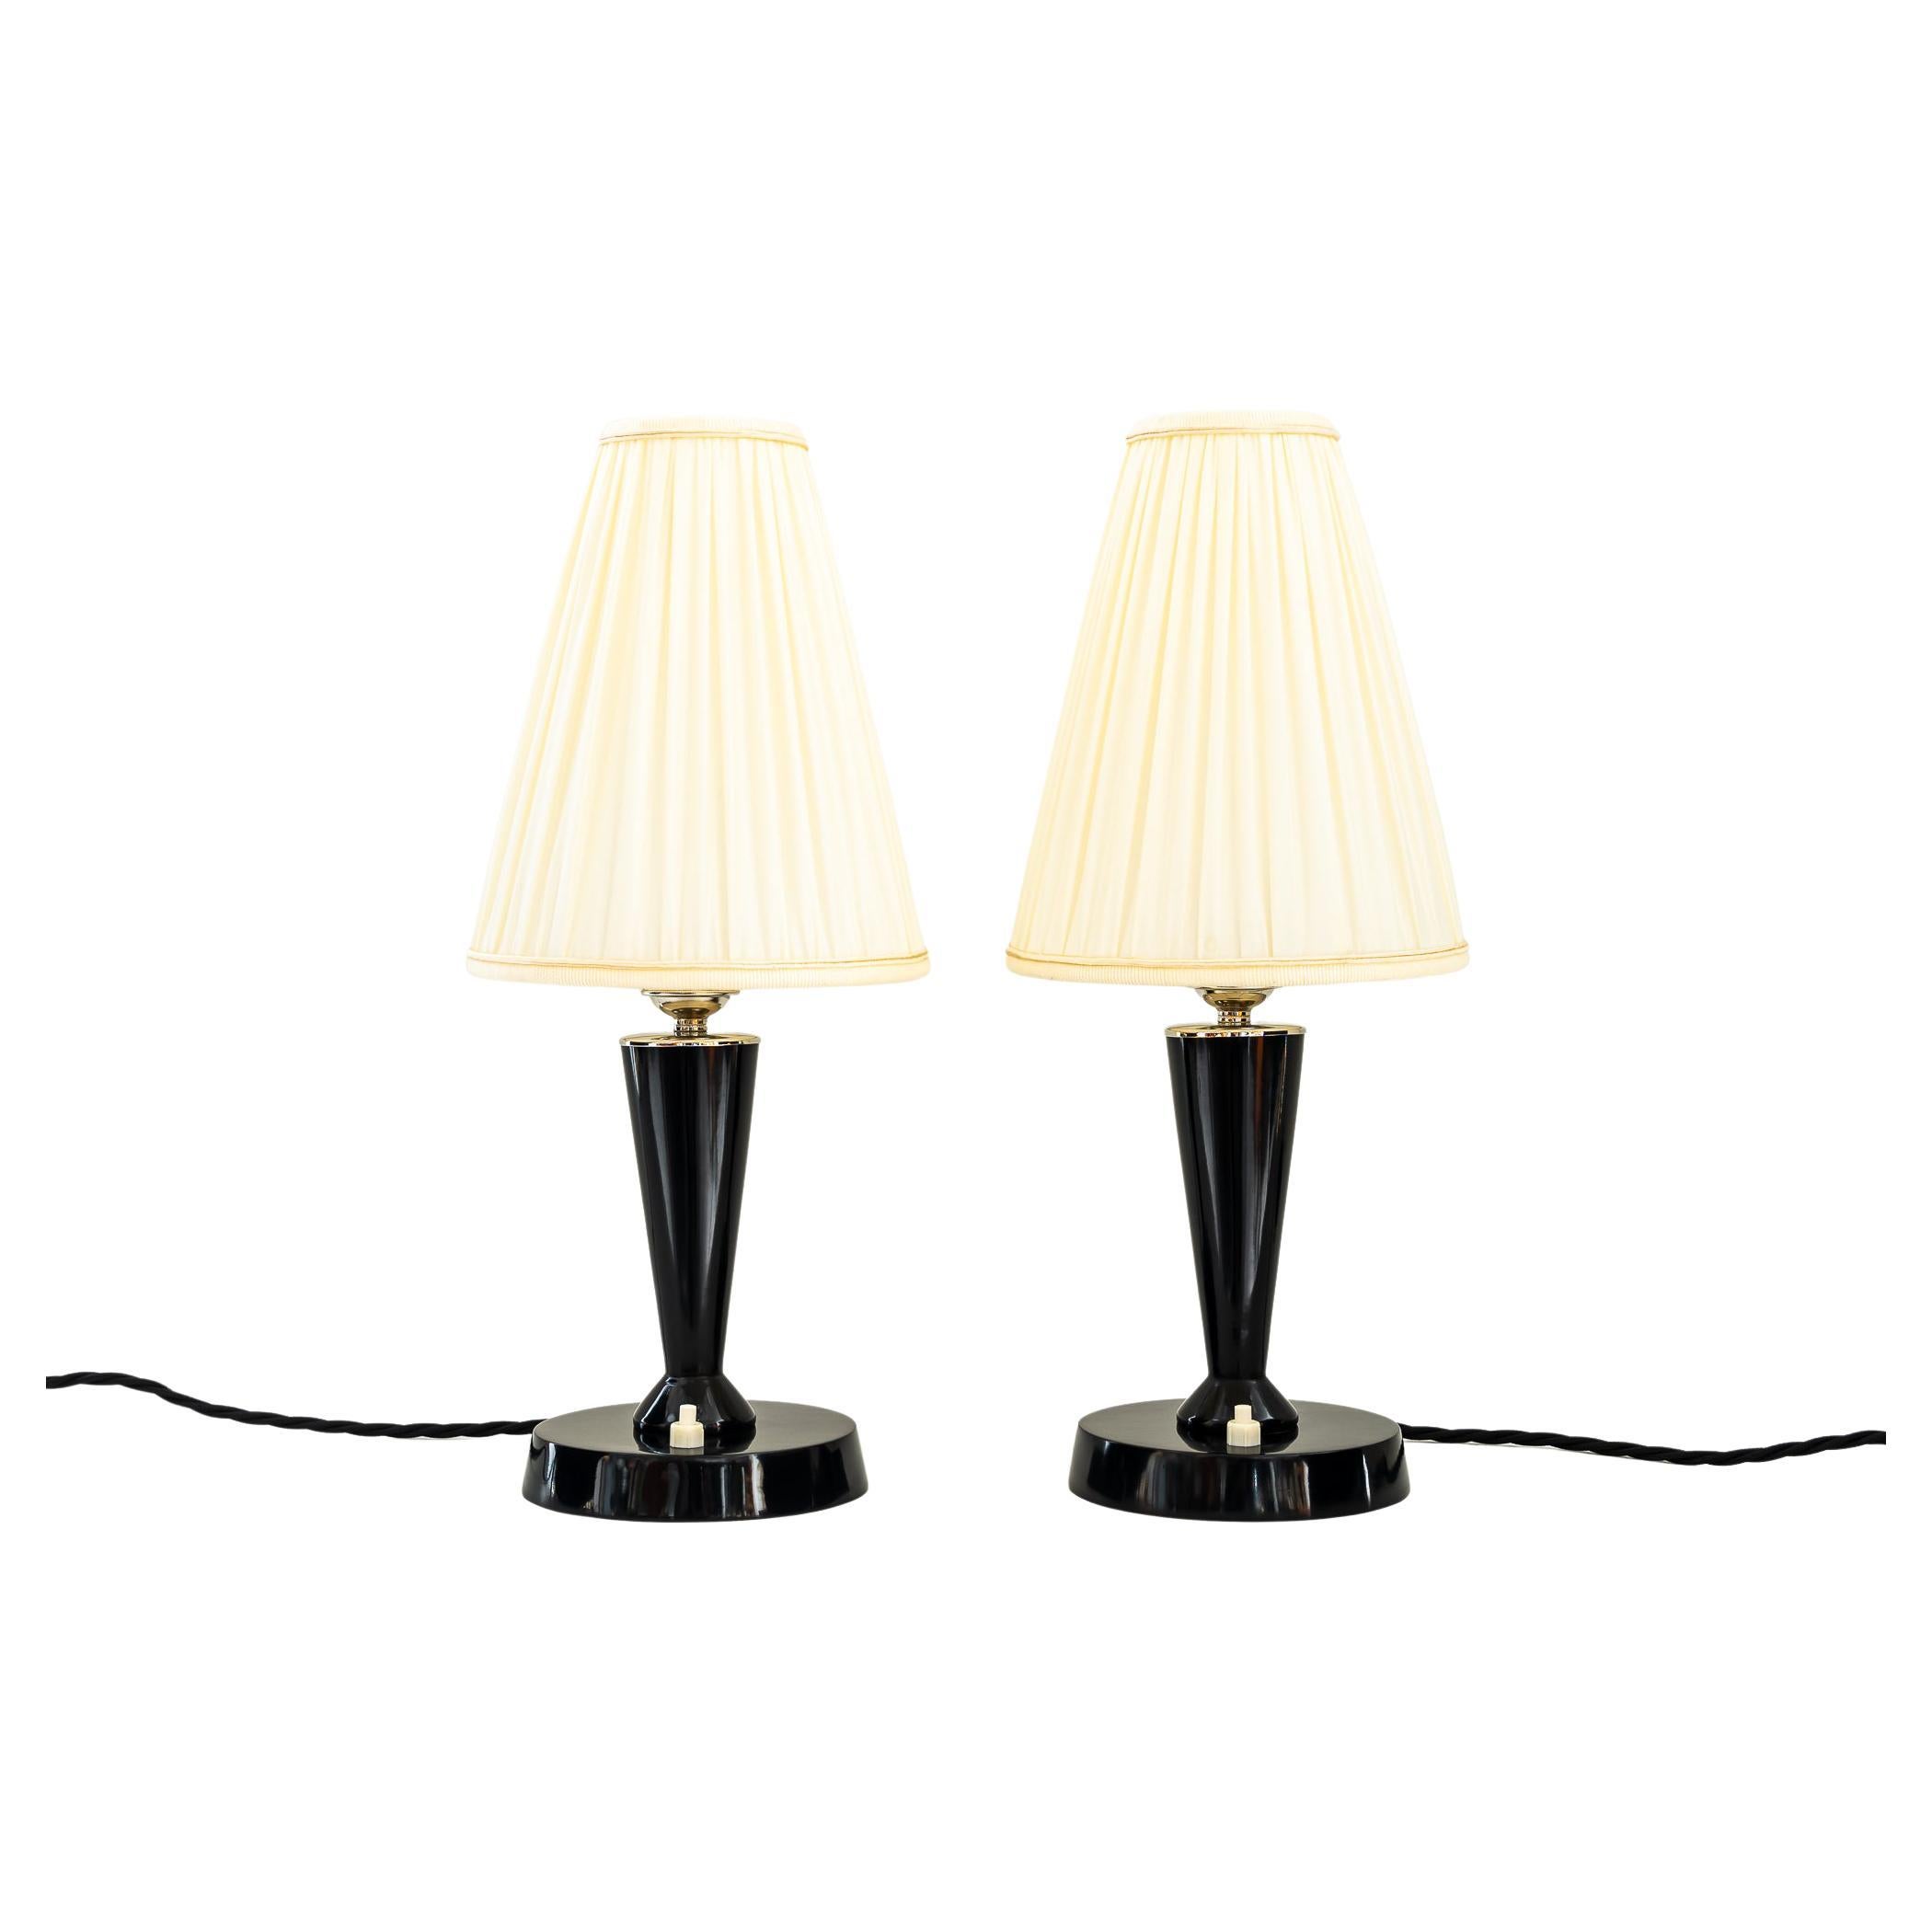 2 Art Deco Table Lamps, Vienna, Around 1930s For Sale